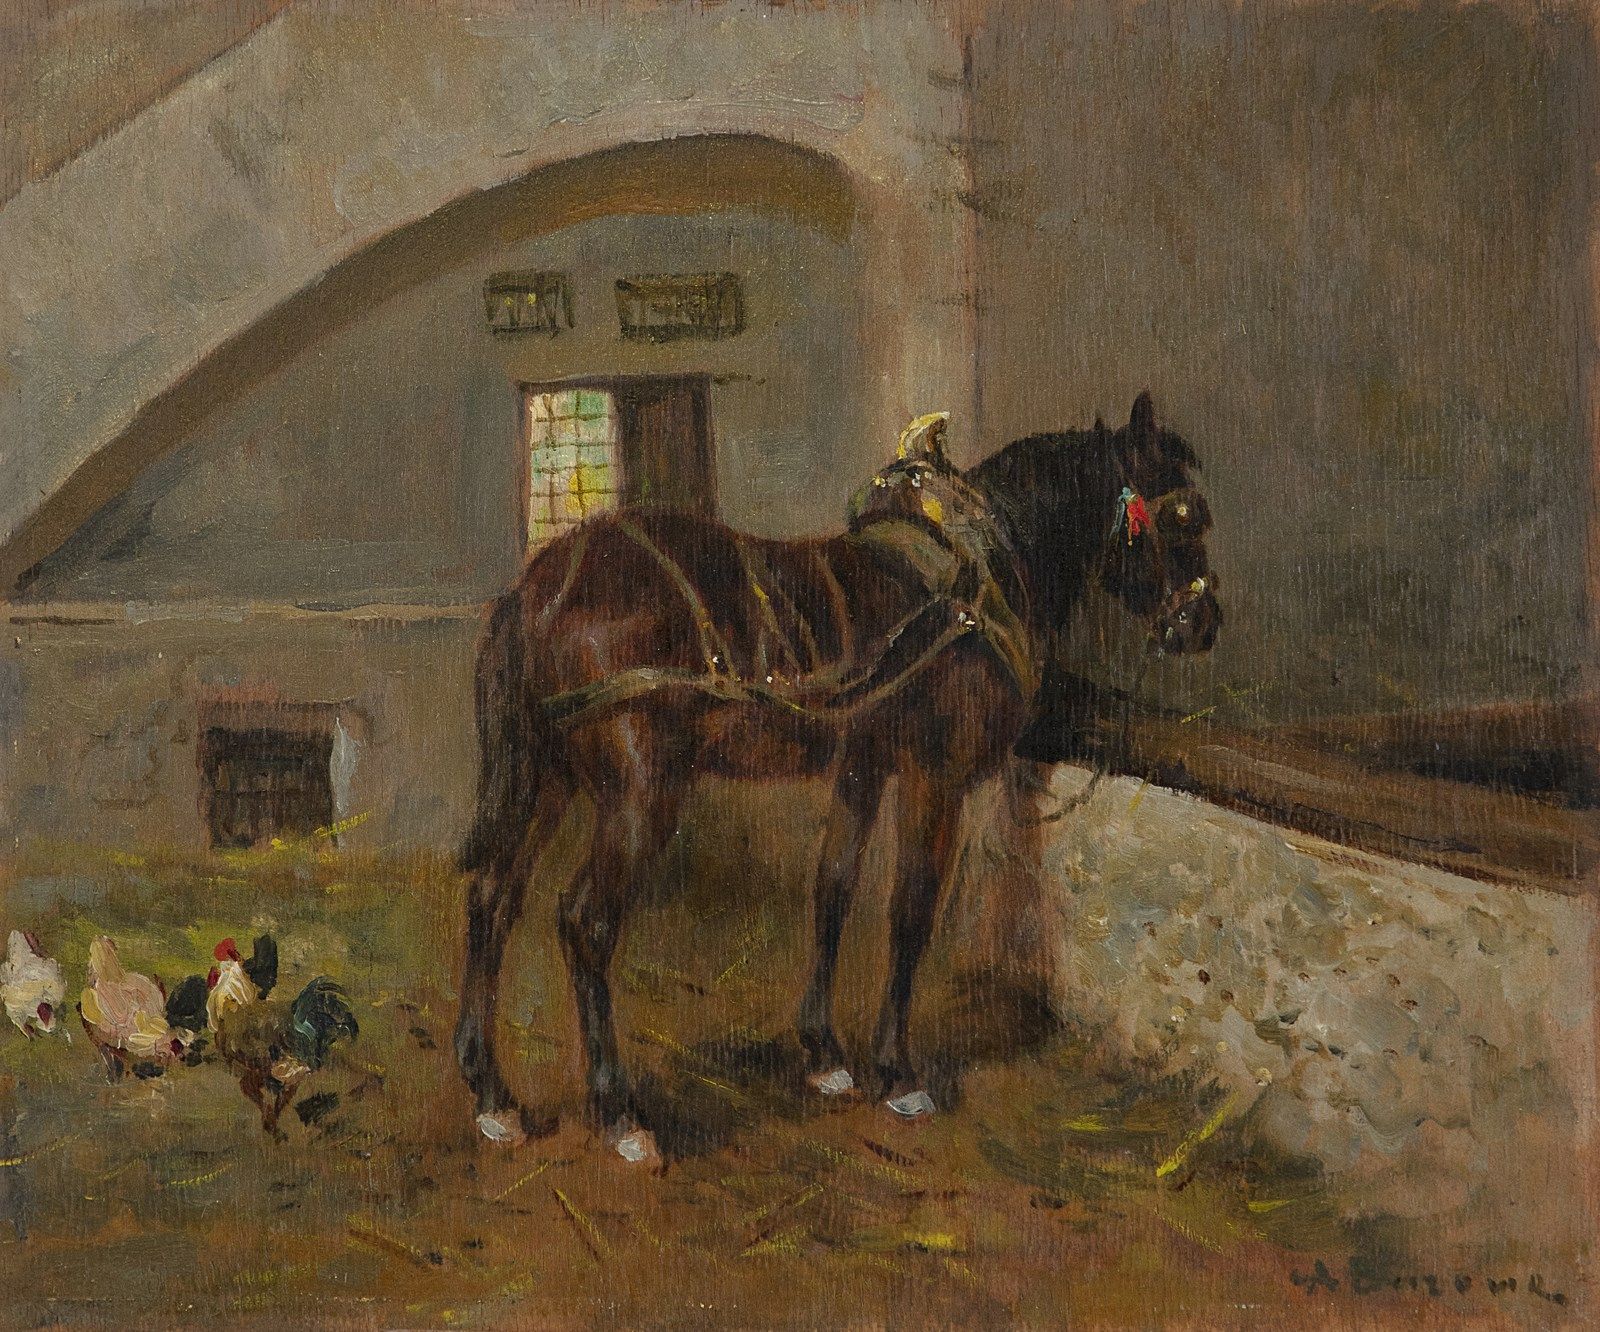 FABBRICATORE NICOLA (1888 - 1962) Inside stable with horse and hens. 法布里卡多-尼古拉（1&hellip;